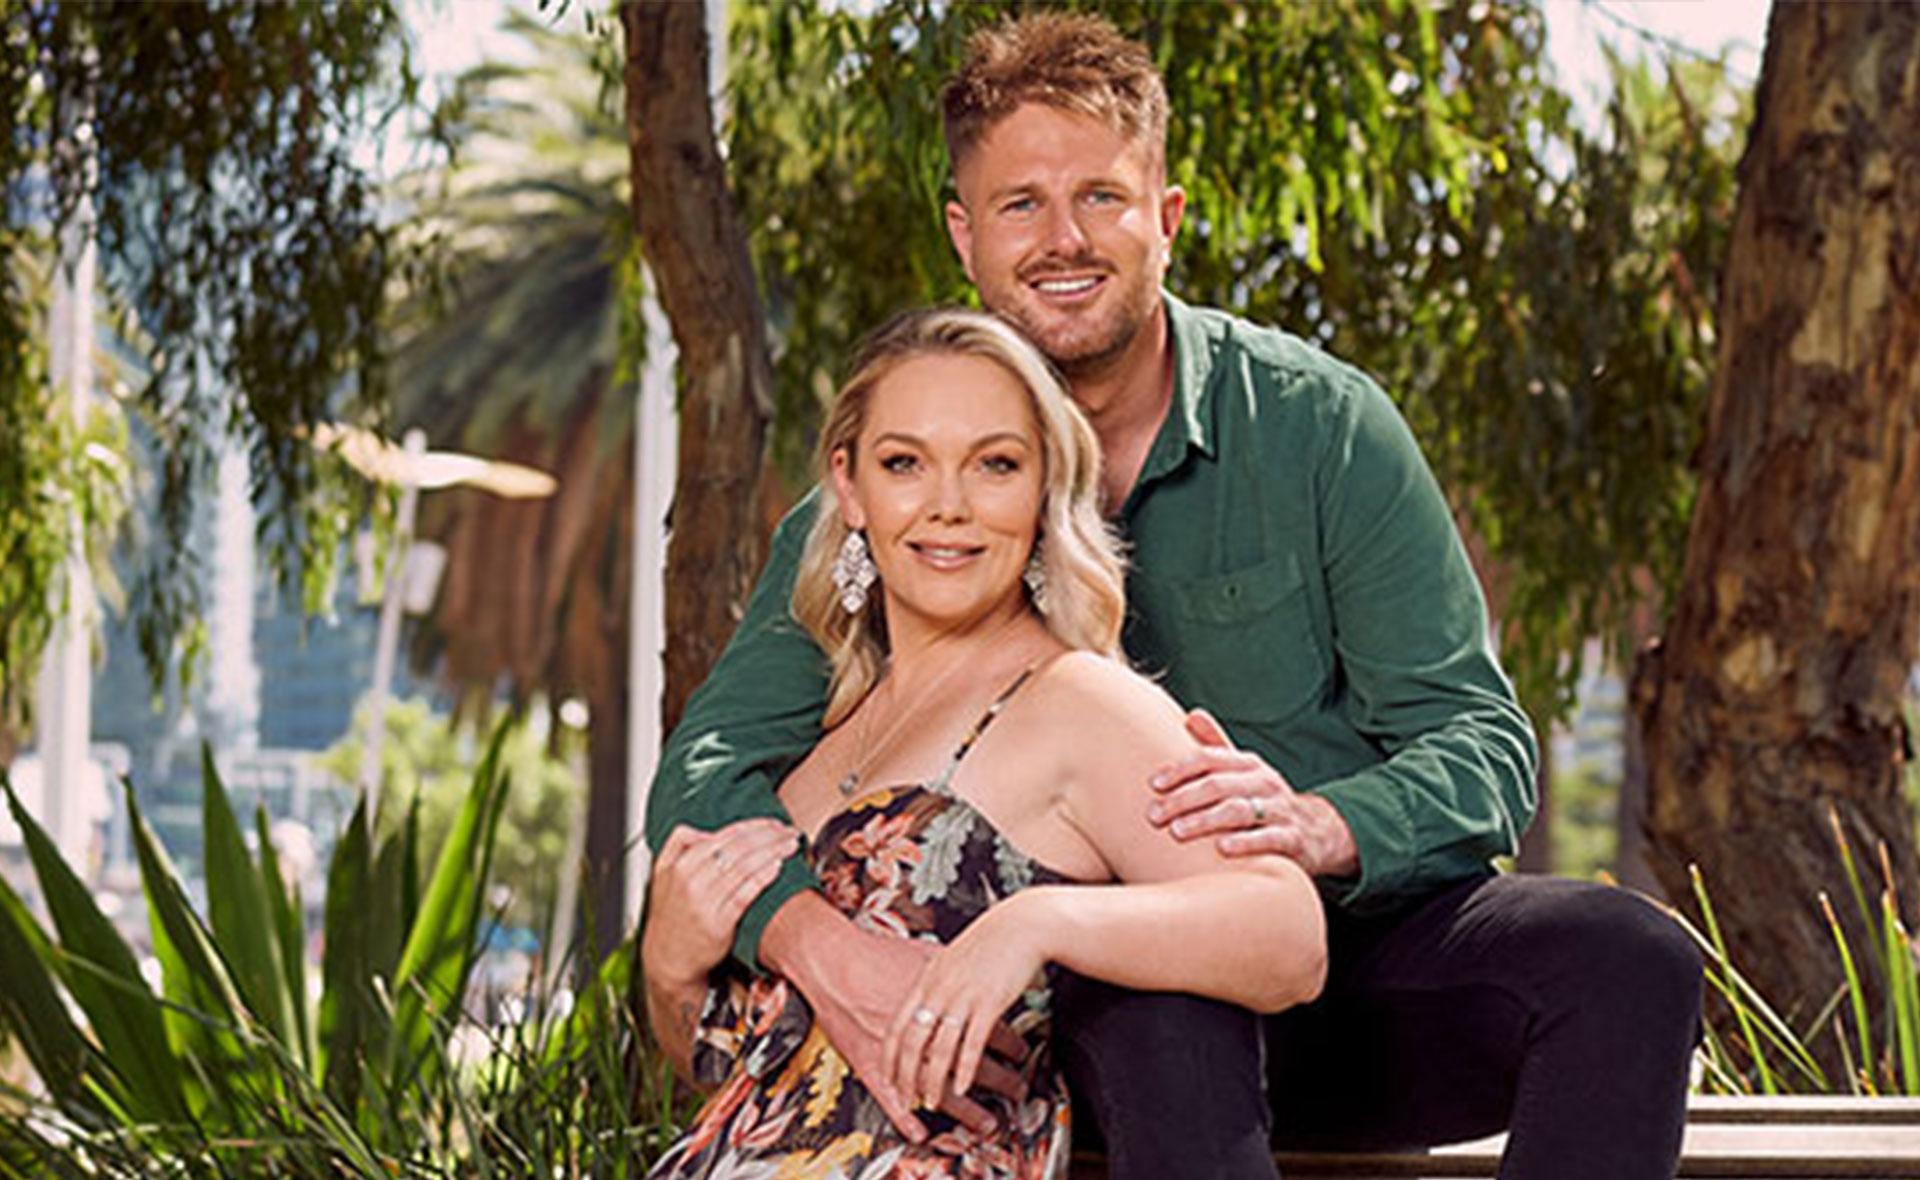 EXCLUSIVE: MAFS’ Bryce and Melissa reveal plans for their own reality show